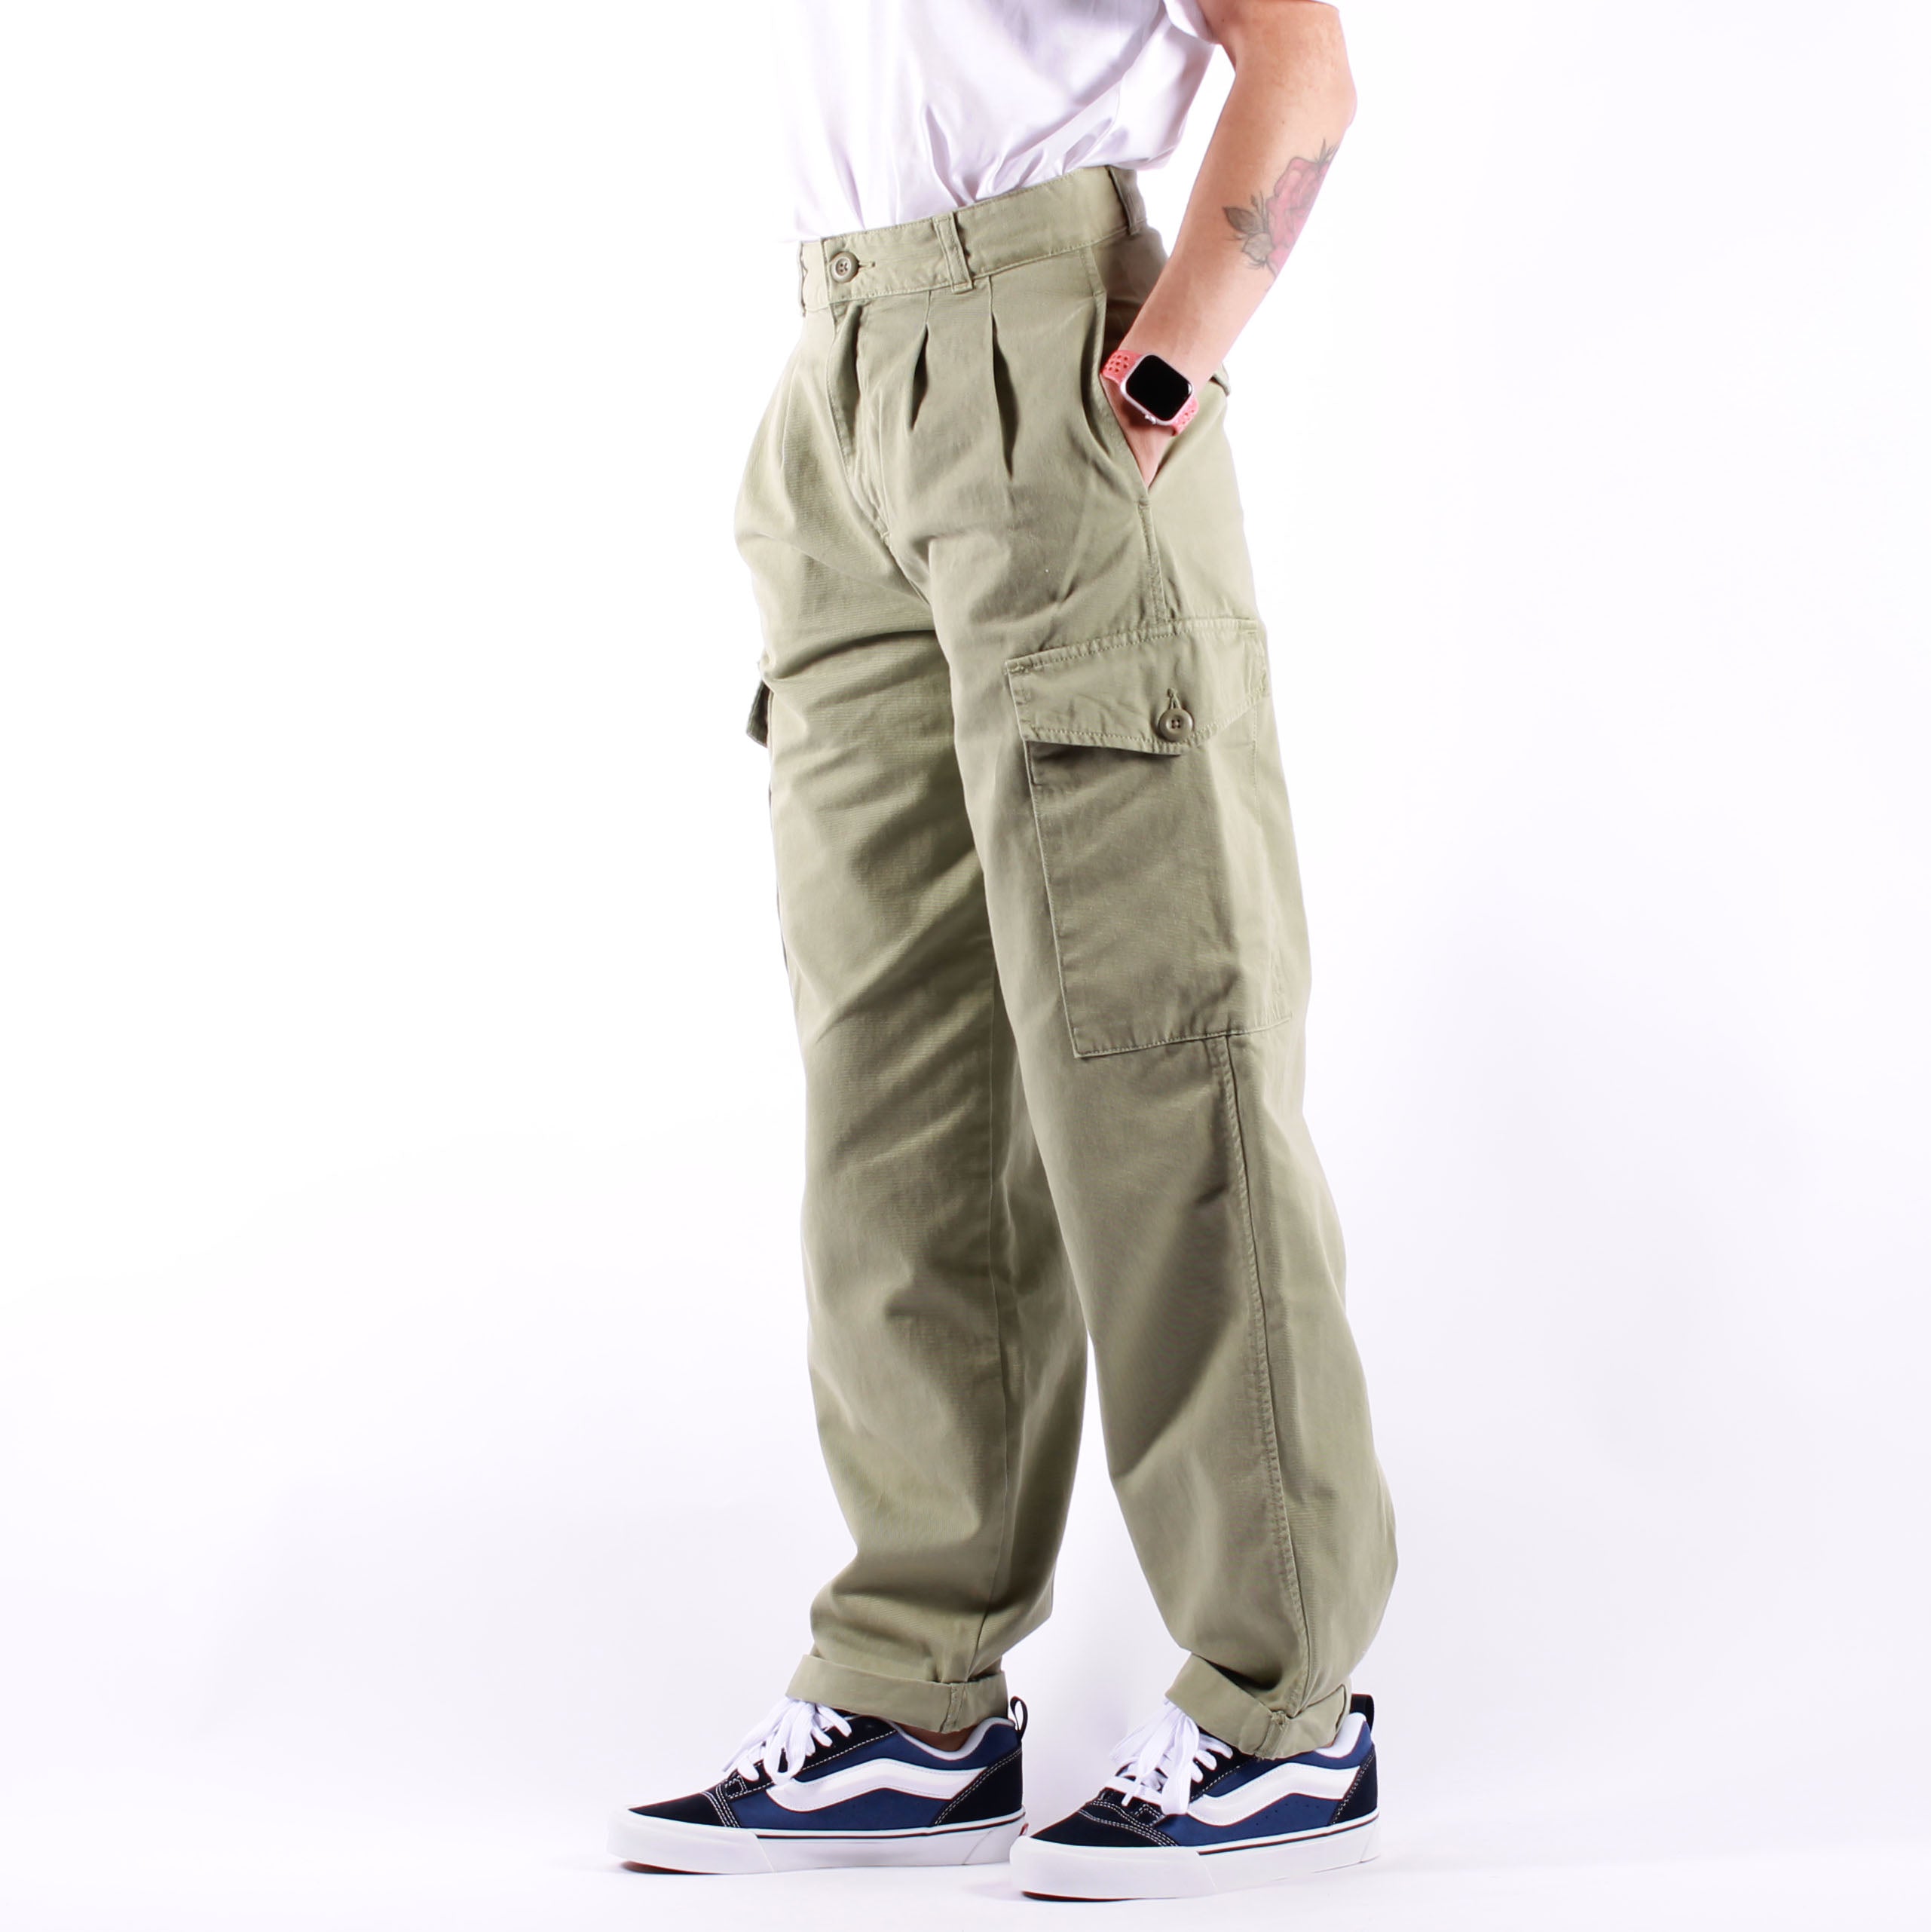 Carhartt WIP - W Collins Pant - Misty Green.